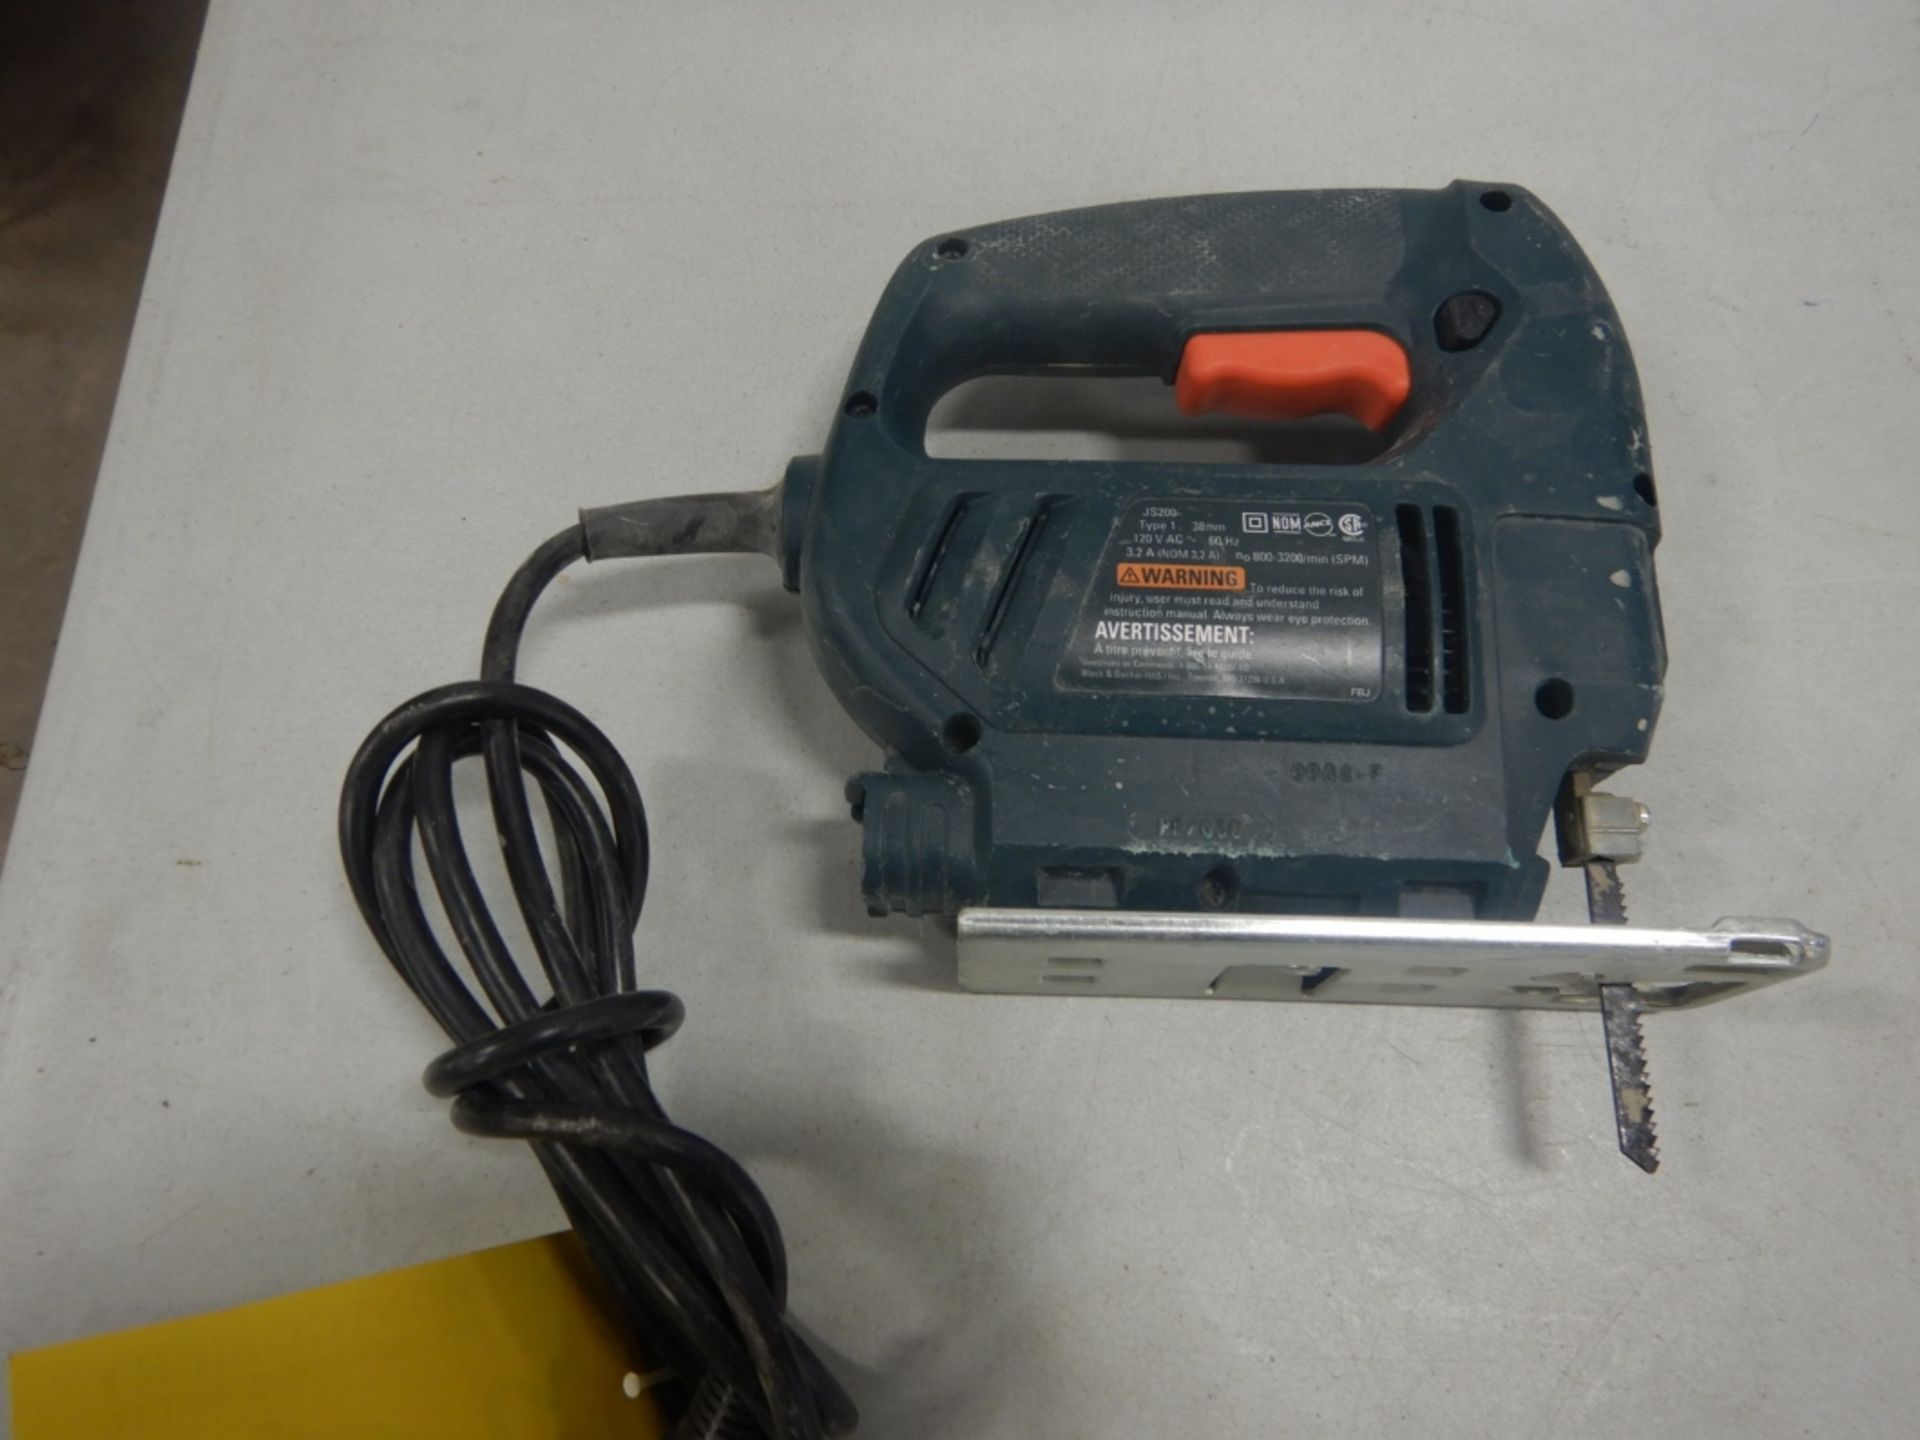 L/O BLACK AND DECKER VARIABLE SPEED 3.2A JIG SAW, SEARS CRAFTSMAN 1/4 SHEET PALM SANDER, MAXIMUM 7. - Image 7 of 10